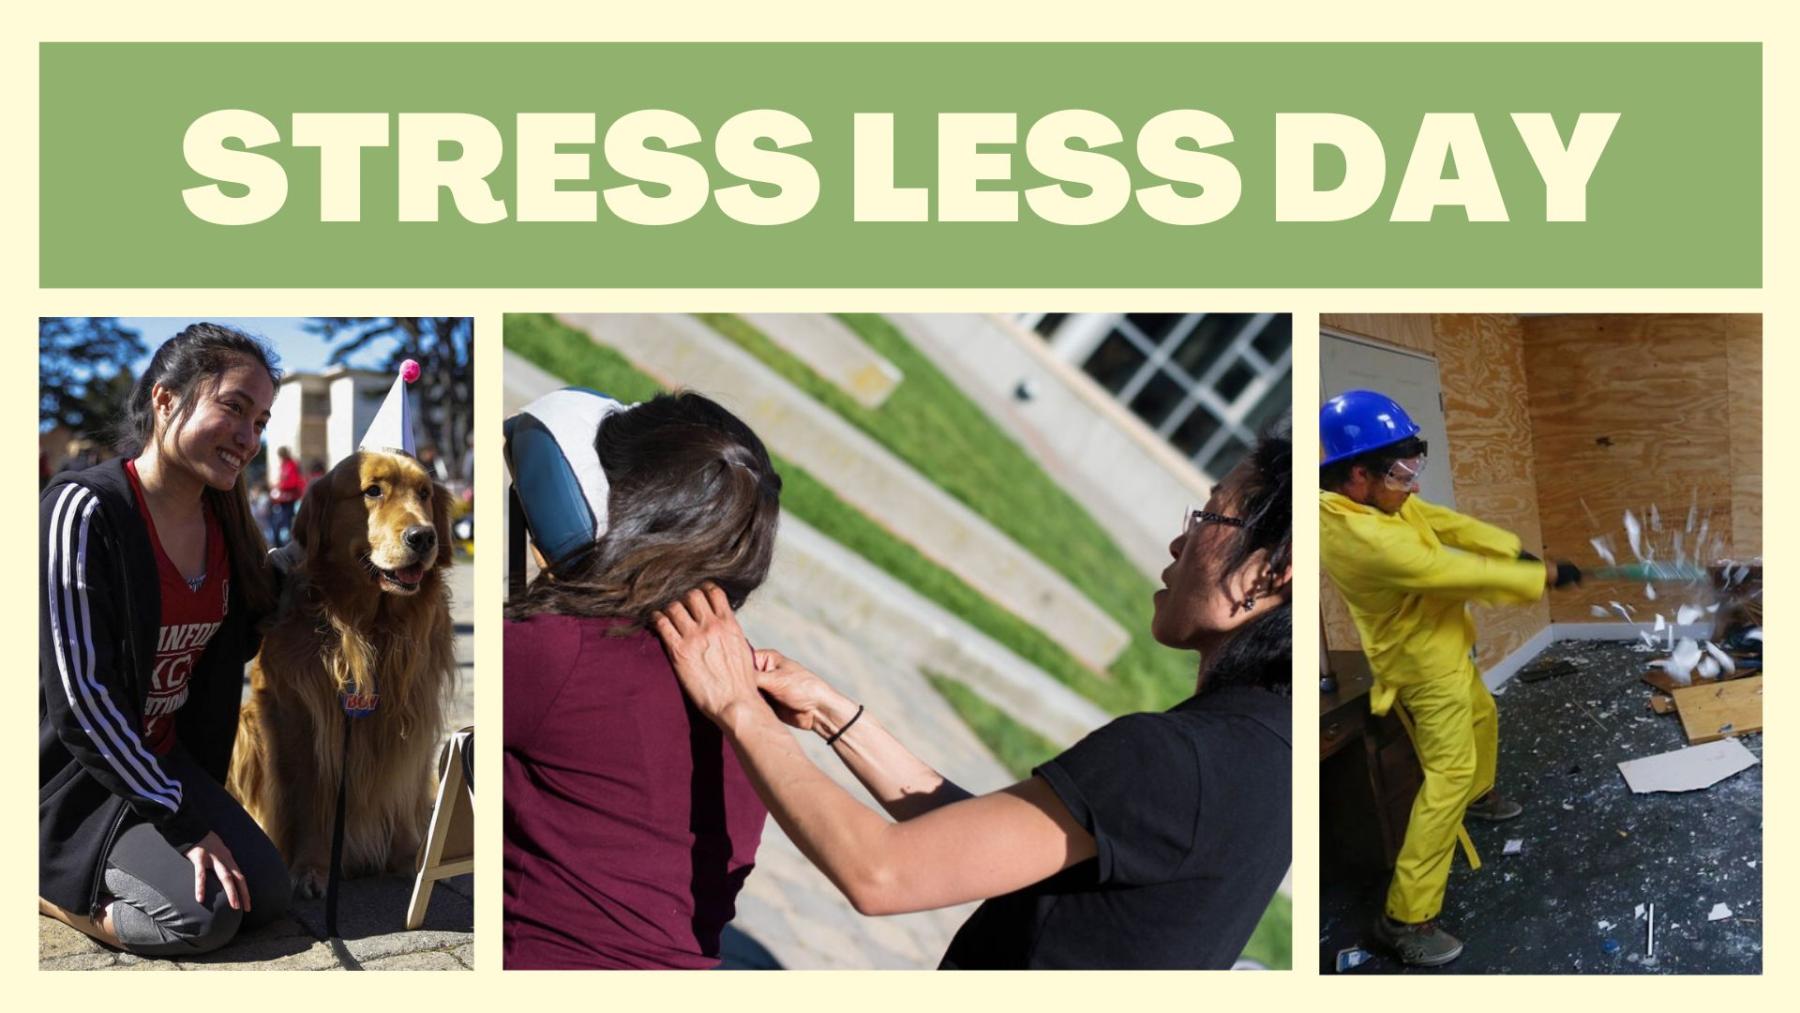 Stress Less Day text and pictures of activities